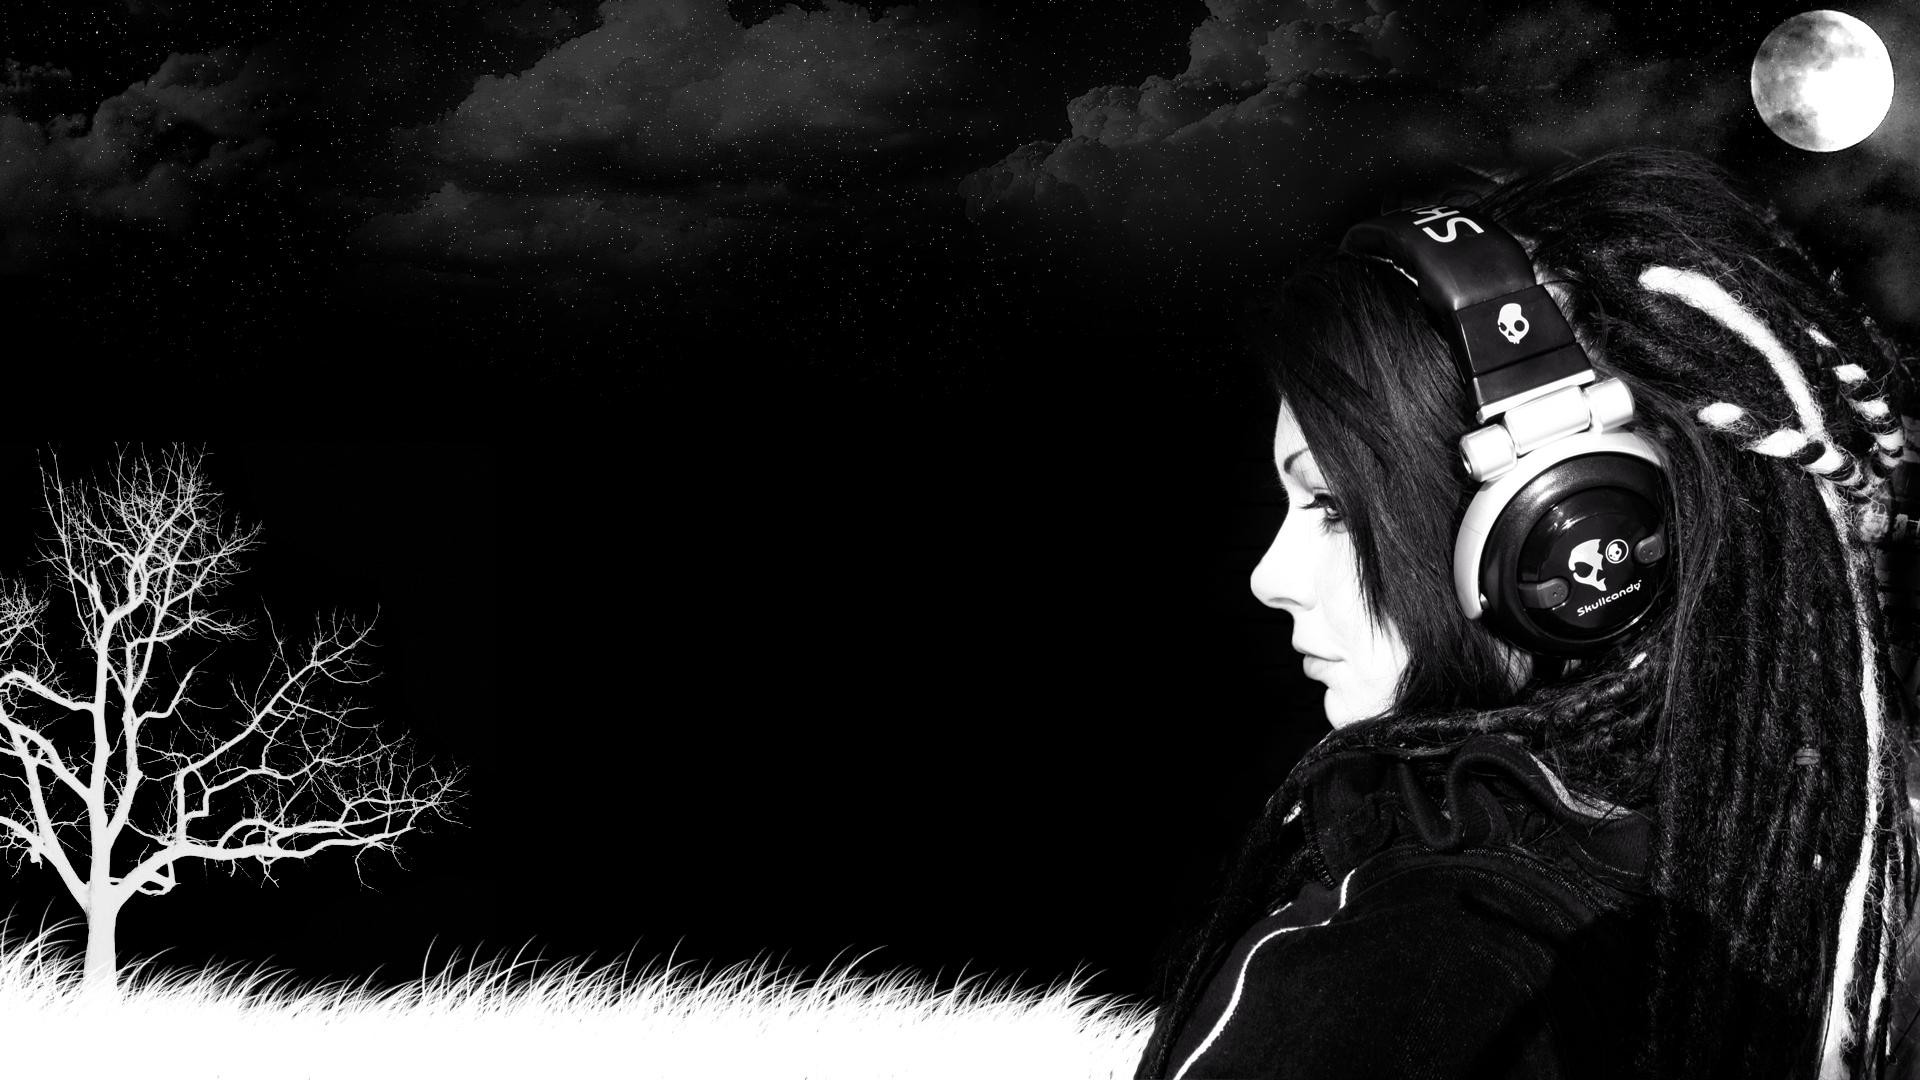 wallpaper related to life,personal protective equipment,headphones,audio equipment,mask,darkness